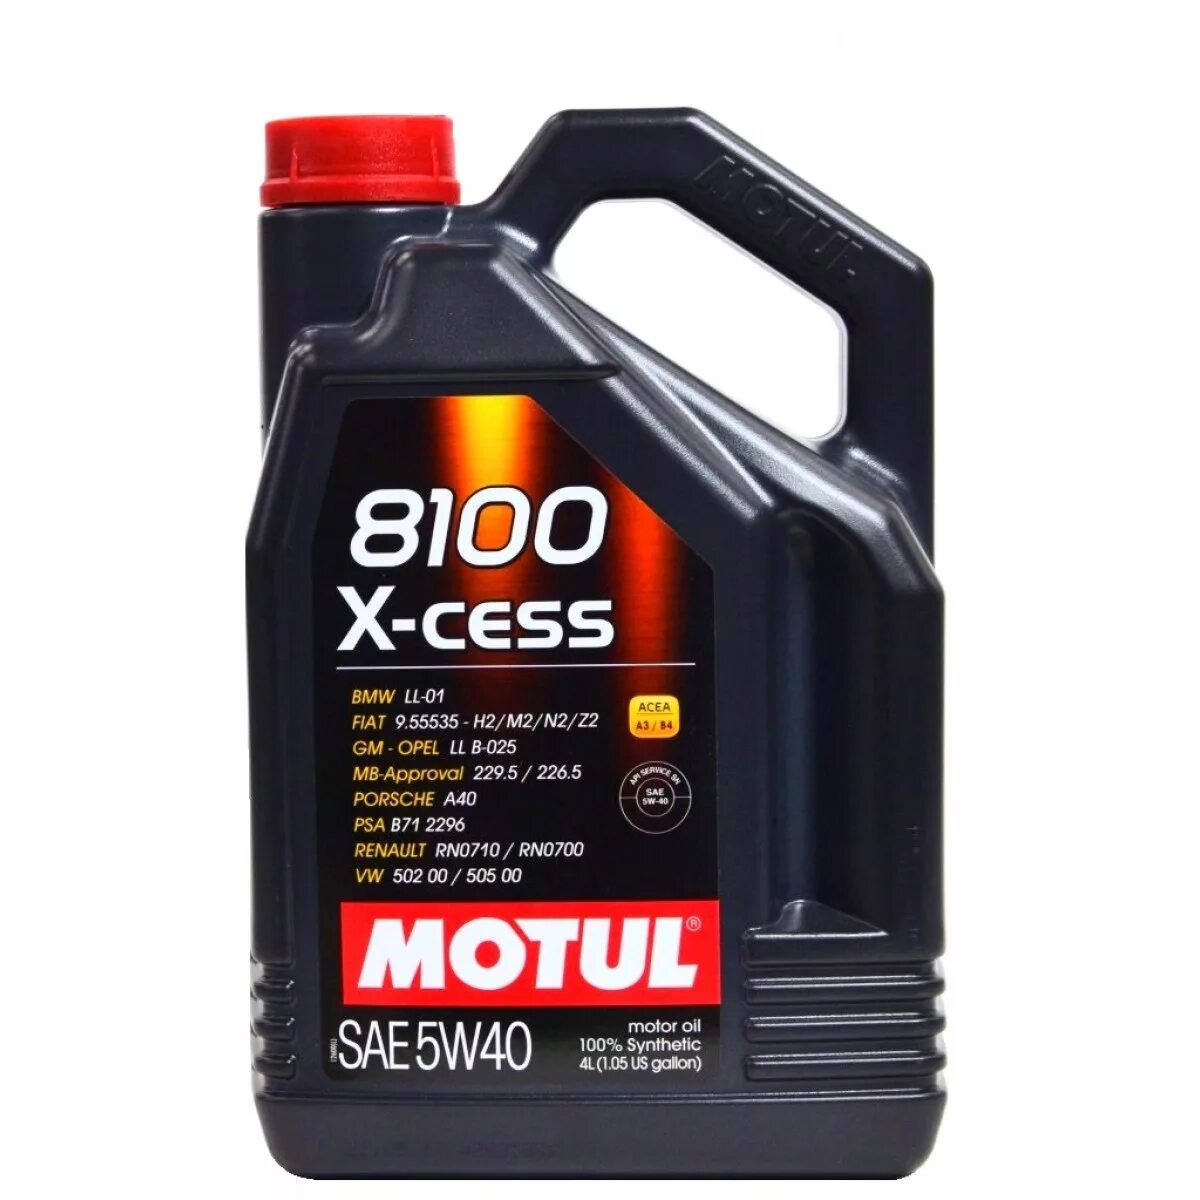 8100 X-Cess 5w-30. Motul авто 8100 Eco-Lite 5w30 5л. 102898 Motul 8100 Eco-NERGY 5w30 a5/b5 SL/CF 5л. Motul 8100 Eco-Lite 5w-20. Моторное масло 8100 5w40